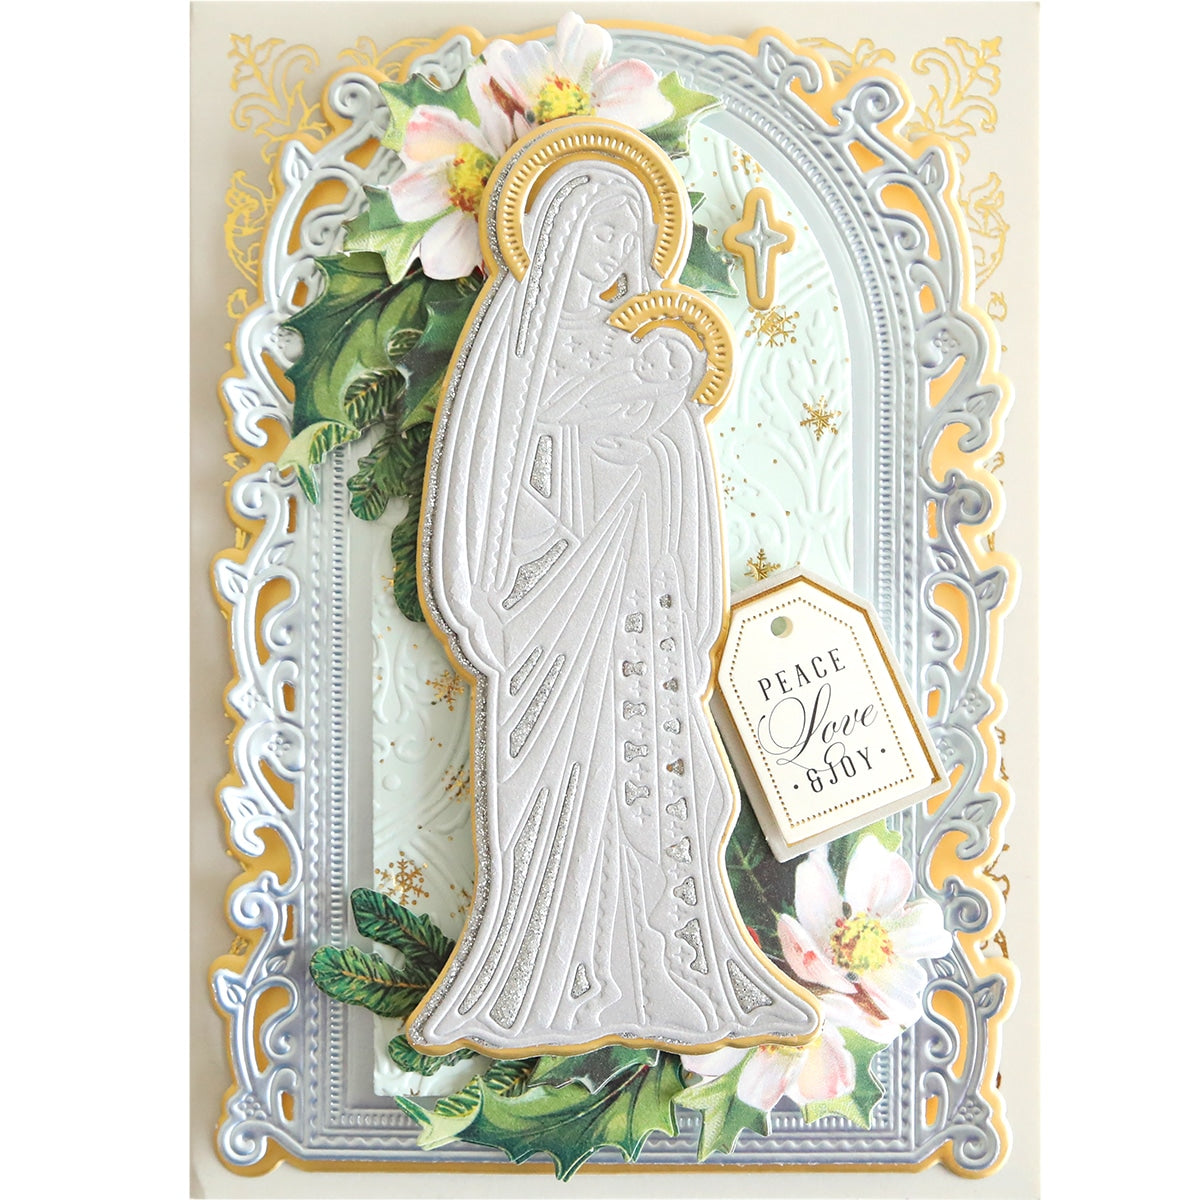 A card with an image of the Madonna & Child Die Set.